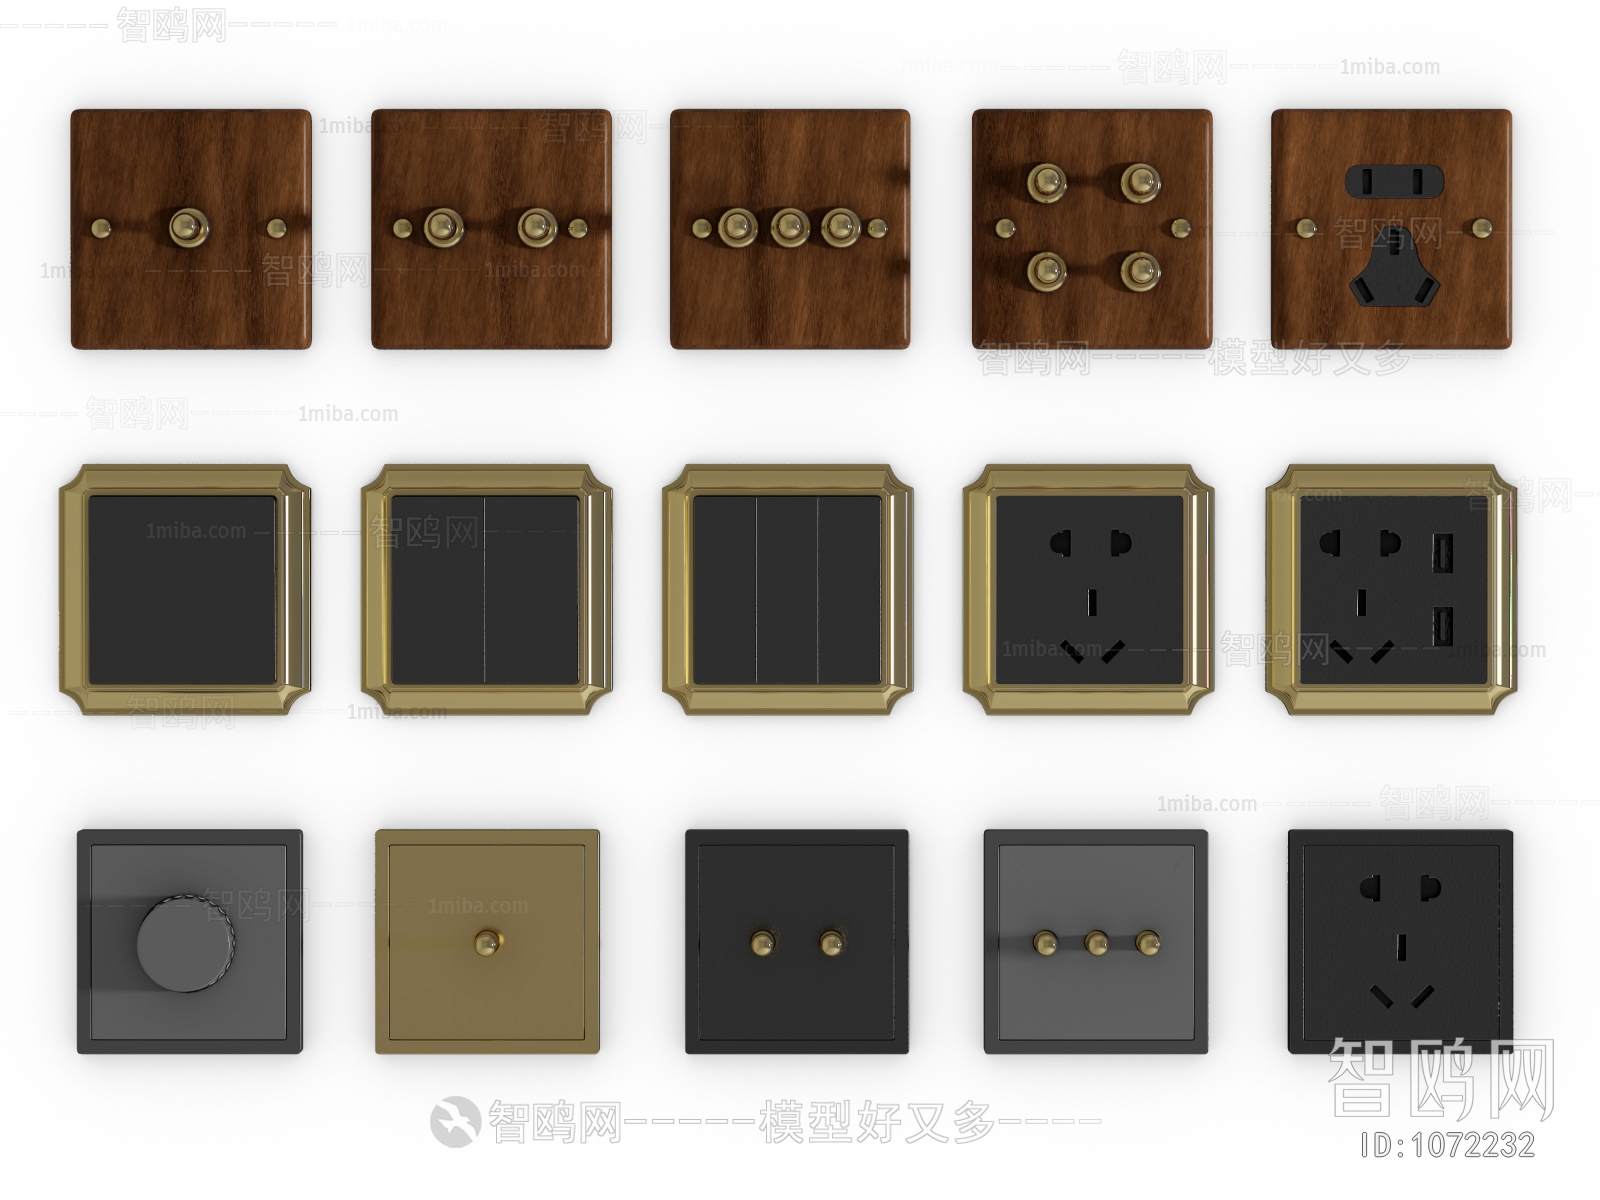 New Chinese Style Switch Socket Panel